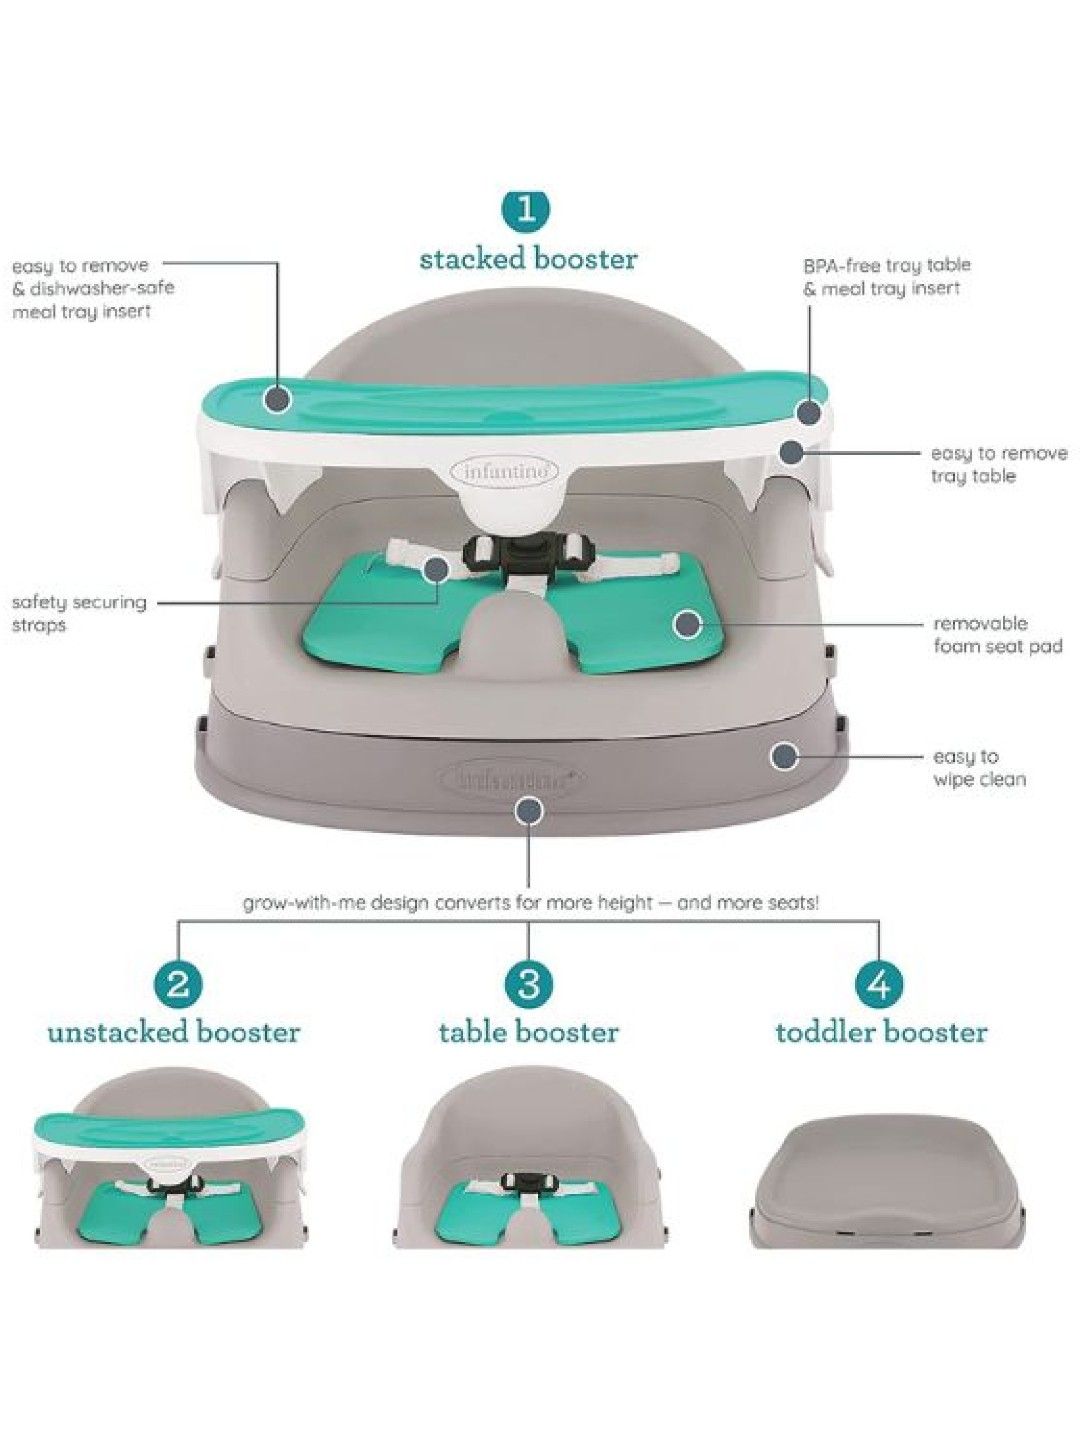 Infantino Grow with me 4-in-1 Two-Can-Dine Deluxe Feeding Booster Seat (No Color- Image 2)